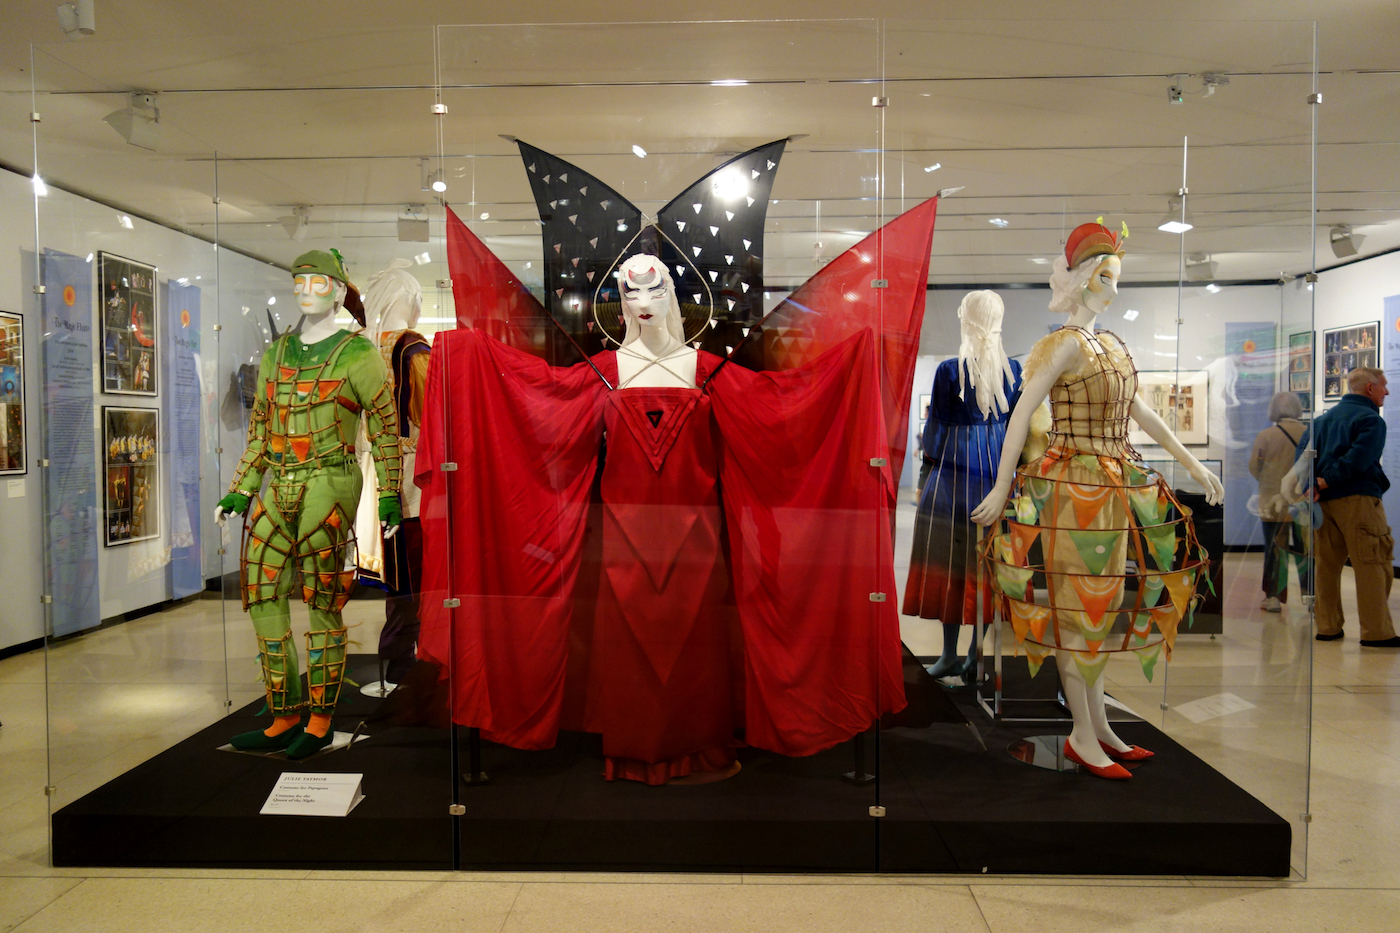 Installation view of 'Magical Designs for Mozart’s Magic Flute,' with costumes designed by Julie Taymor in 2004 for the Metropolitan Opera